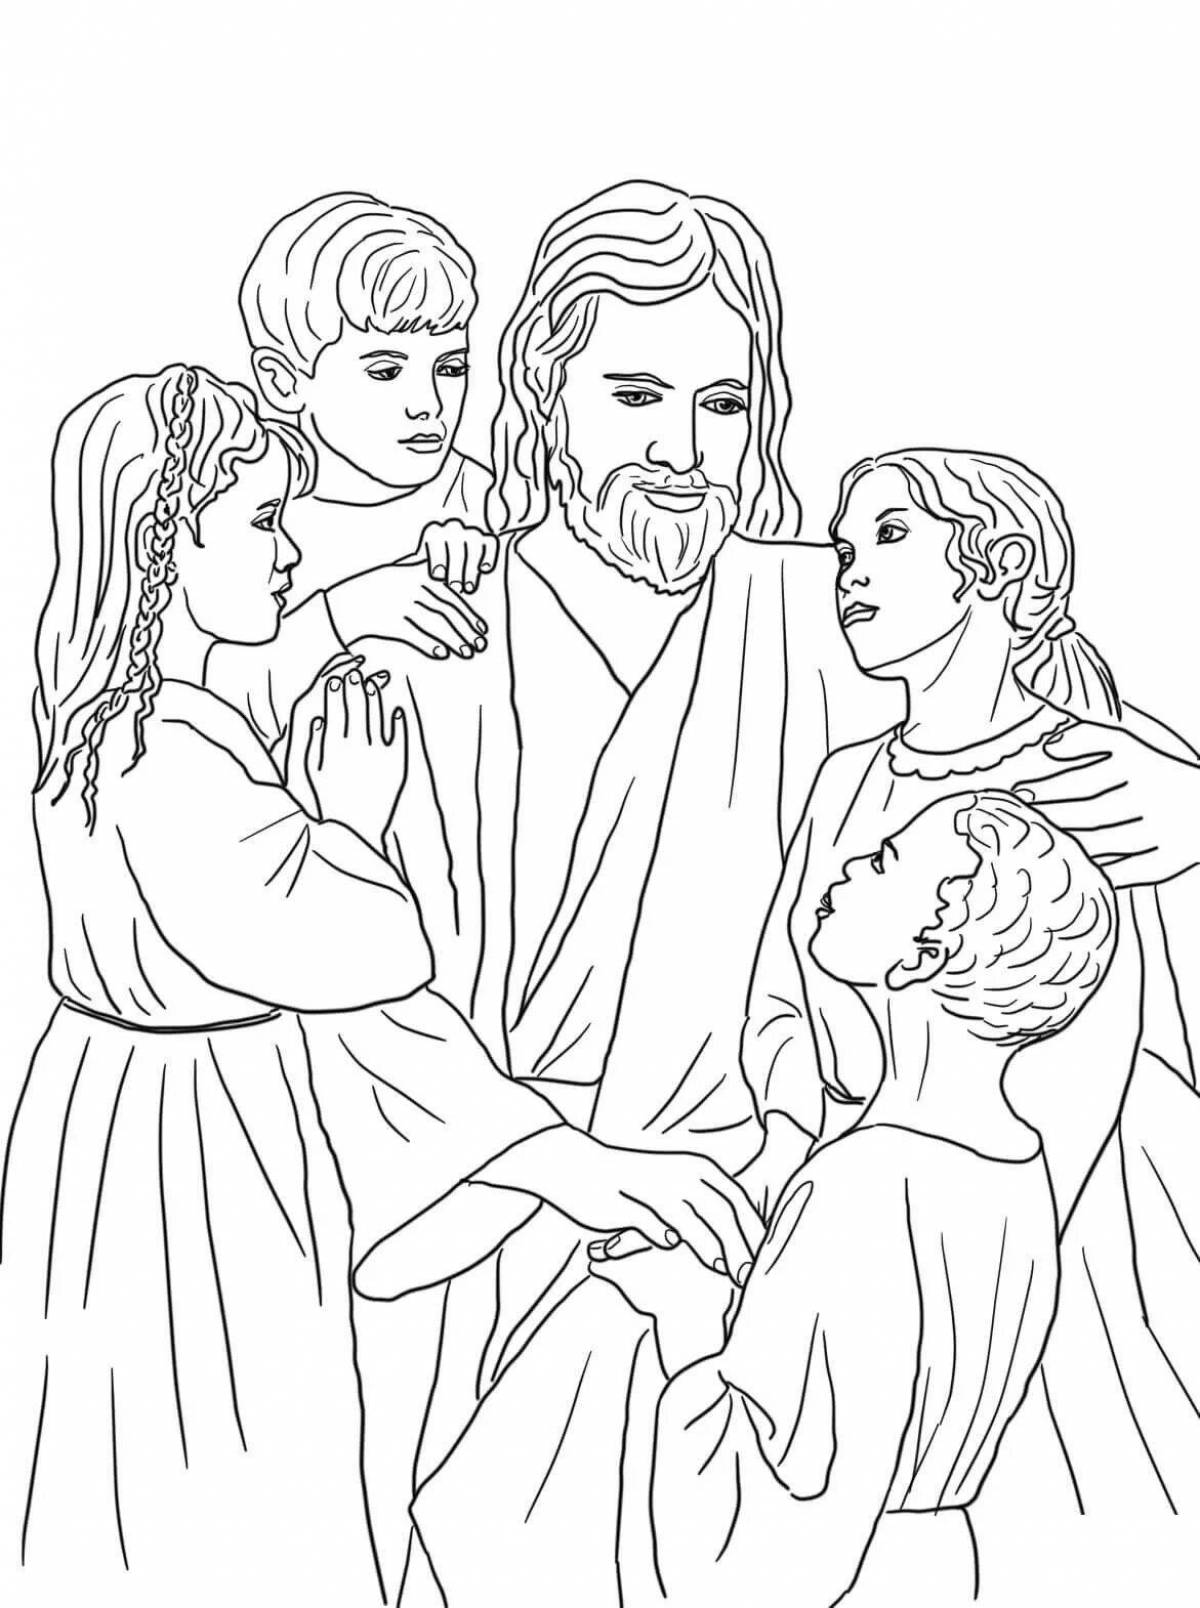 Exalted jesus christ coloring page